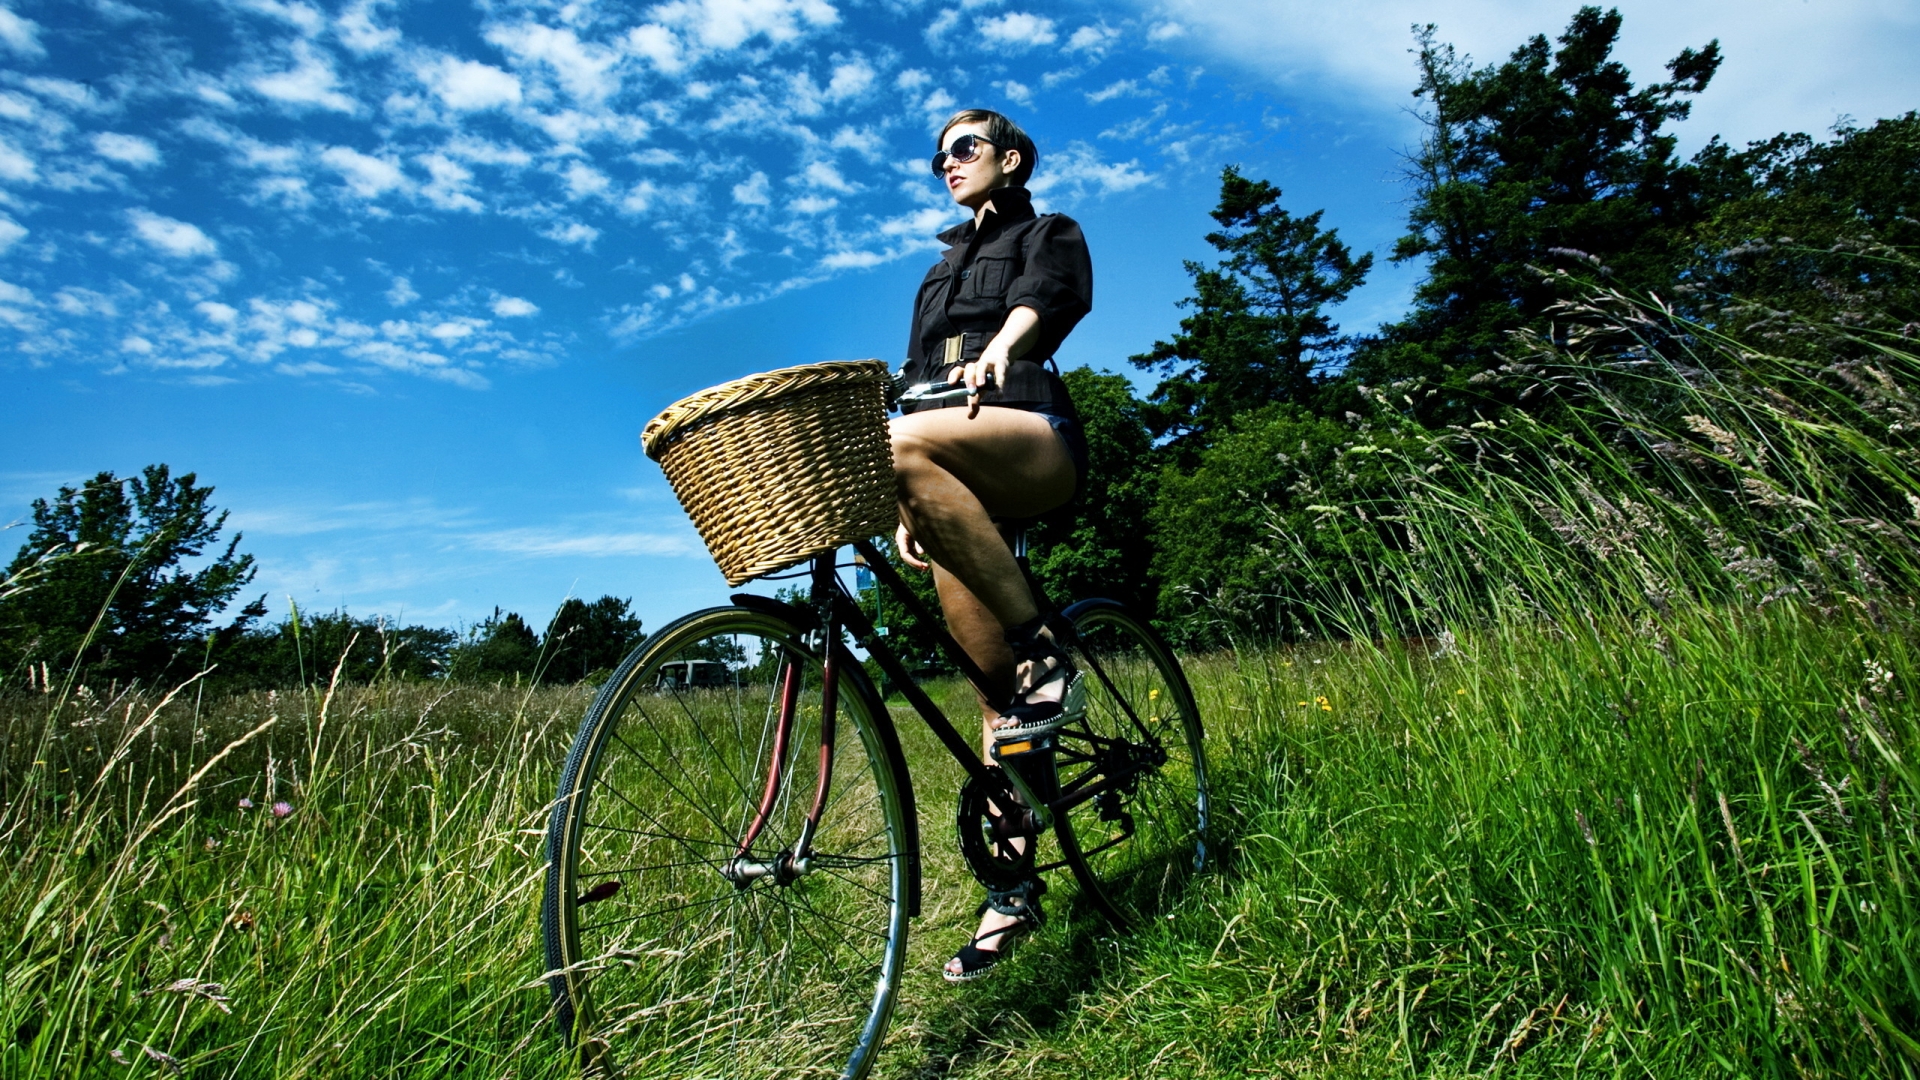 Cool Lady on Bike for 1920 x 1080 HDTV 1080p resolution